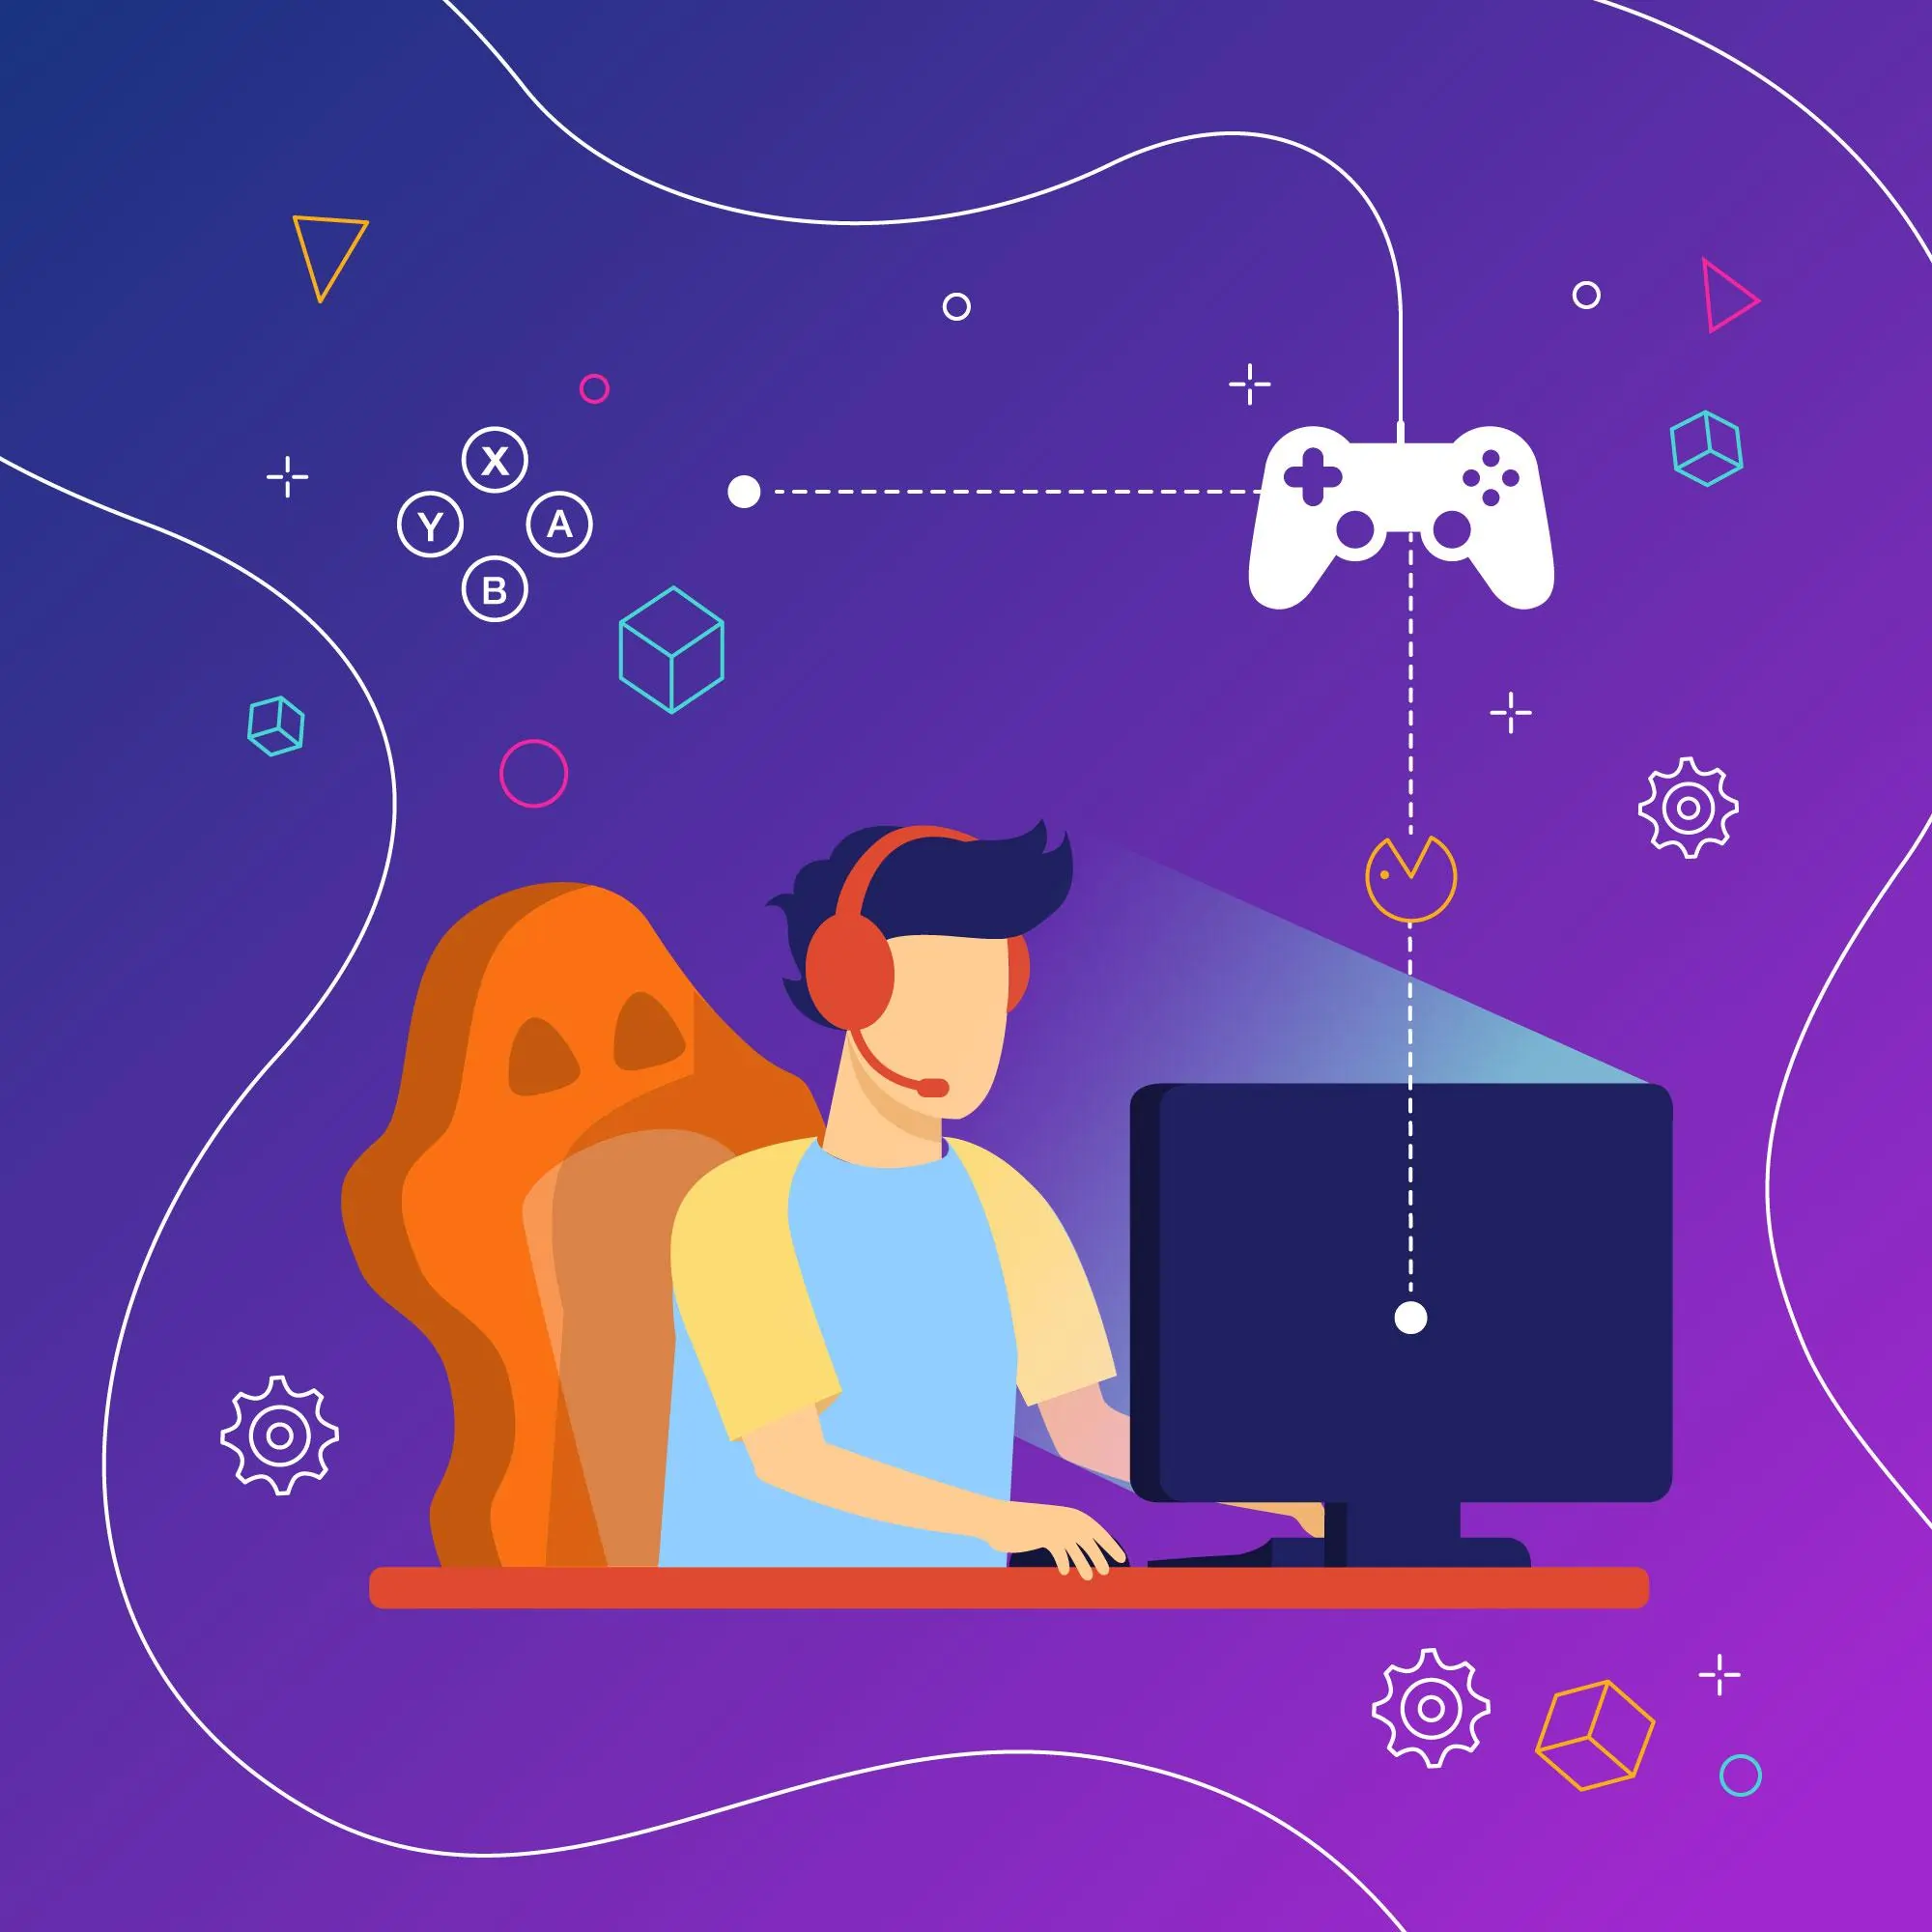 game testing services